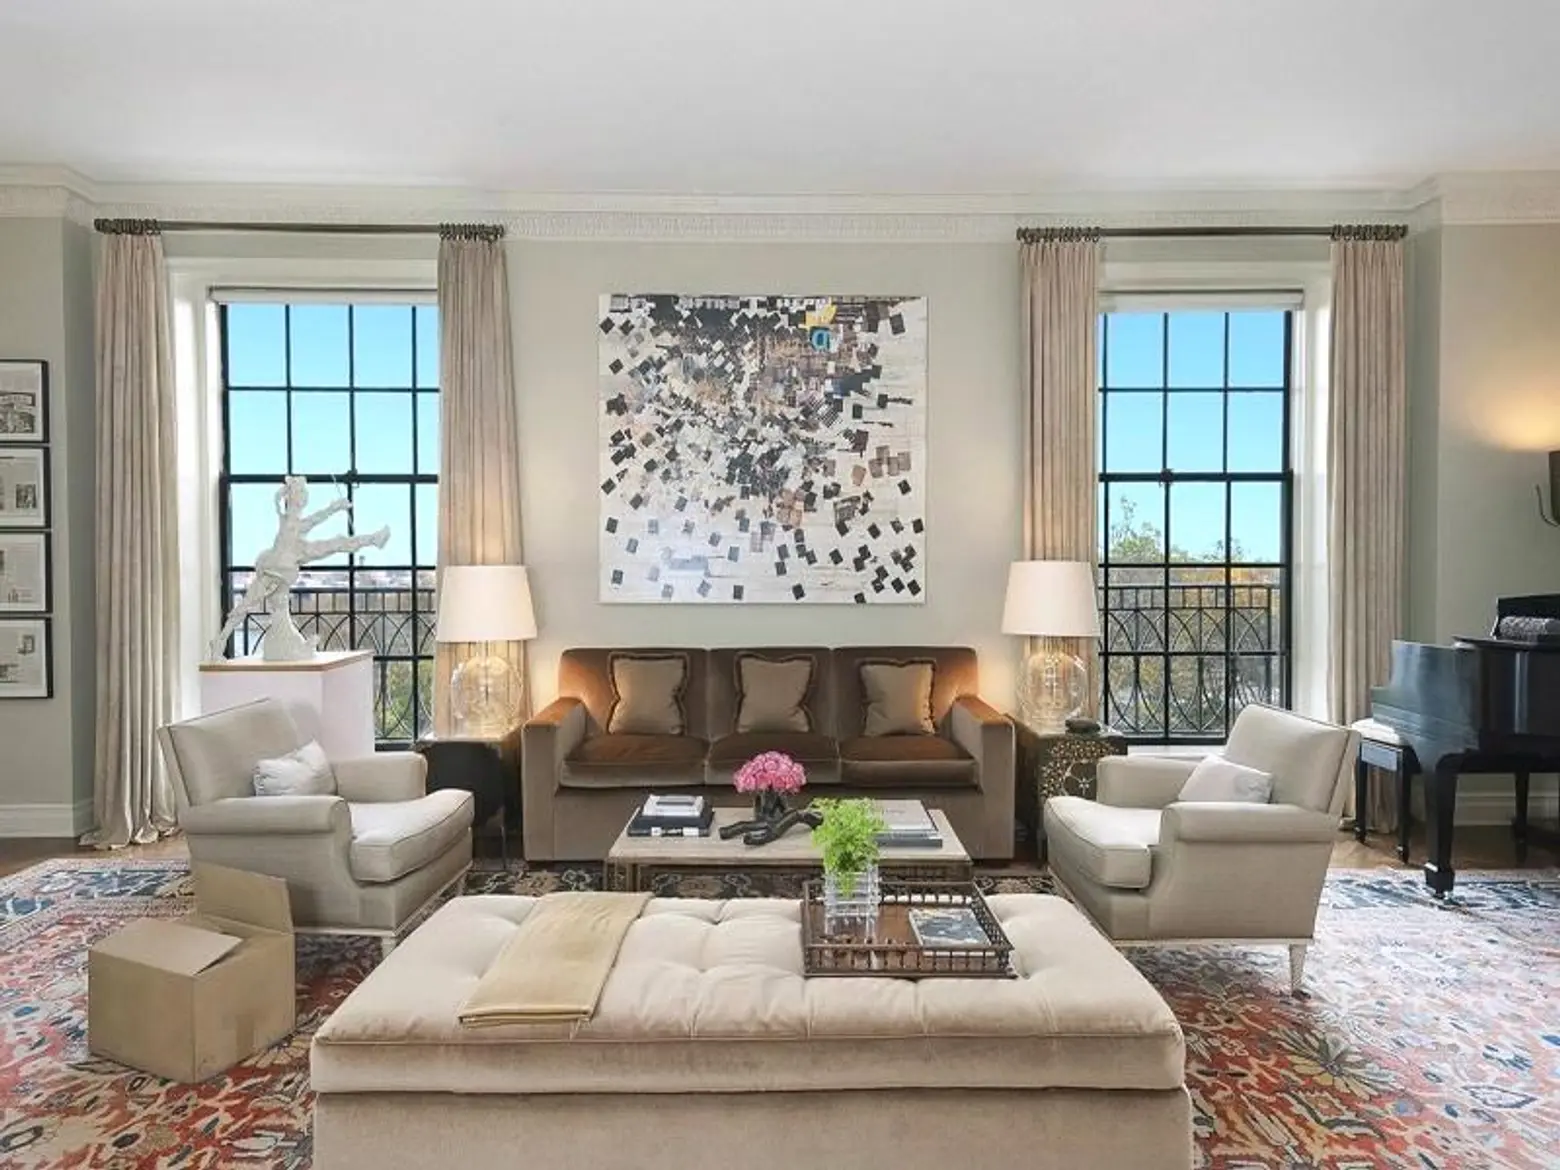 Barbara Walters' $17.75M Upper East Side apartment finds buyer